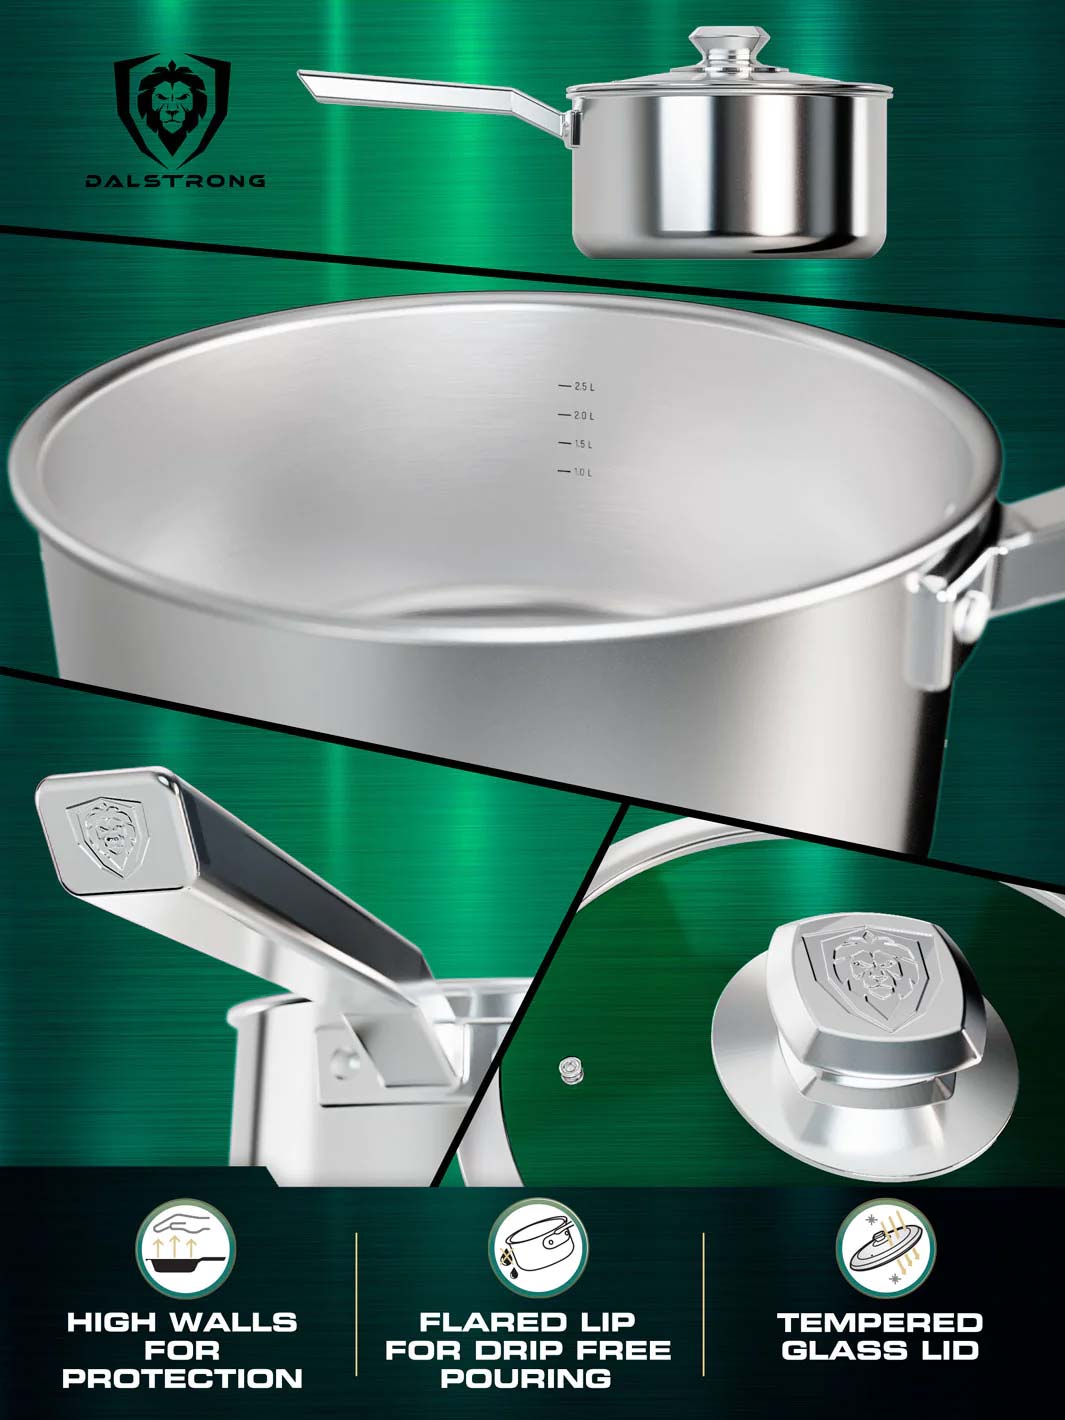 Dalstrong oberon series 3 quart stock pot silver showcasing it's high walls and tempered glass lid.